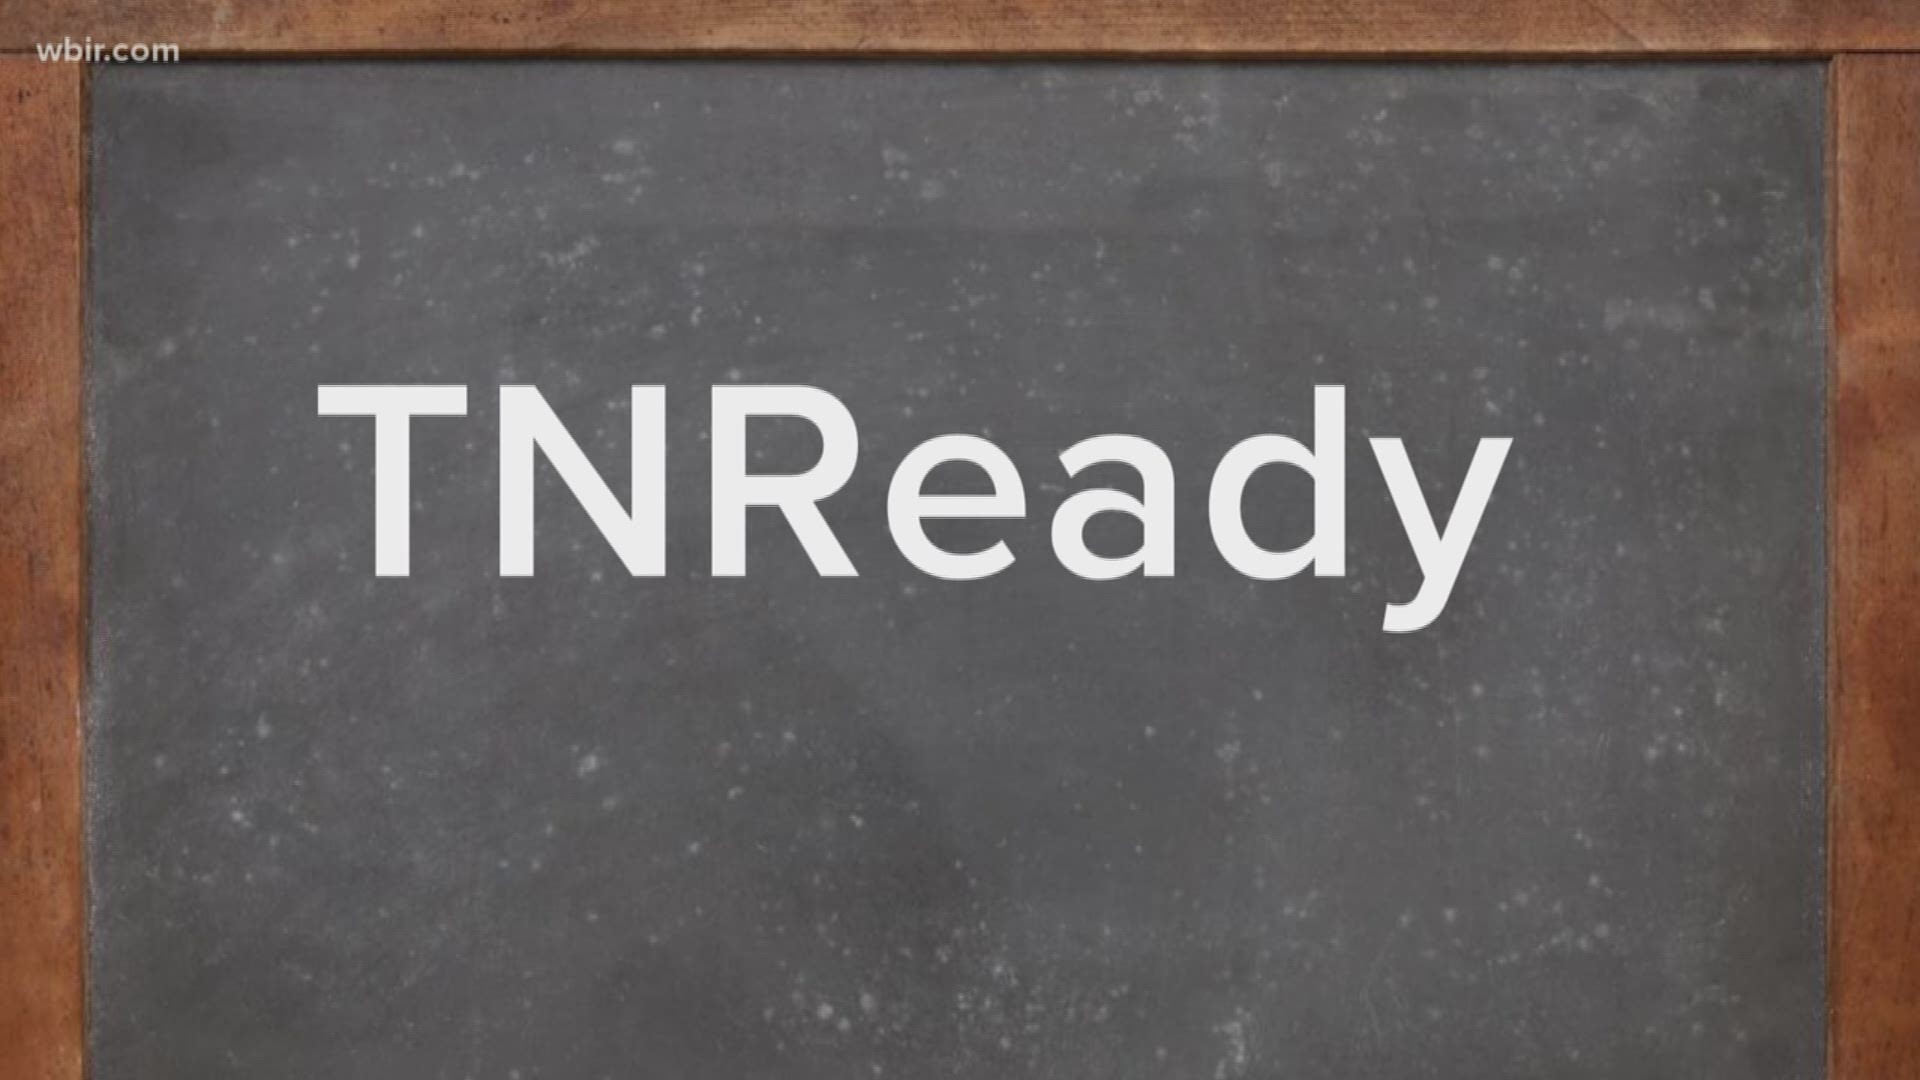 April 25, 2018: Despite reassurance from lawmakers, Knox County teachers still have concerns about the impact of TNReady scores on their evaluations.